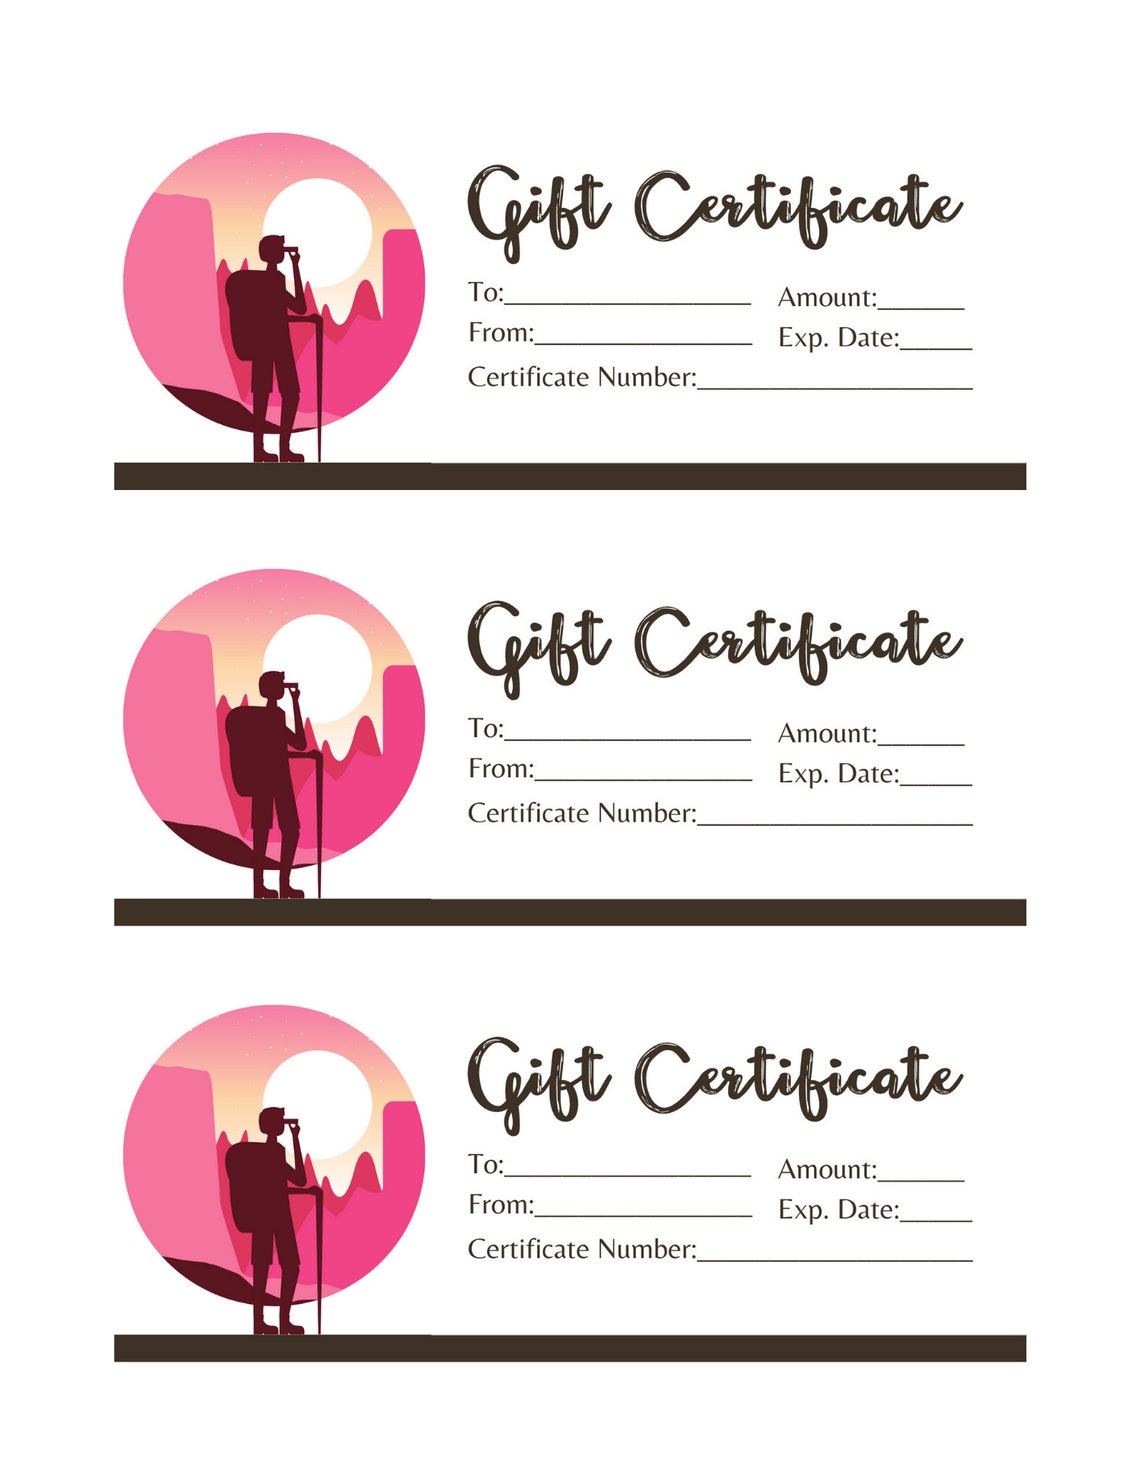 fathers-day-gift-certificate-printable-gift-certificate-etsy